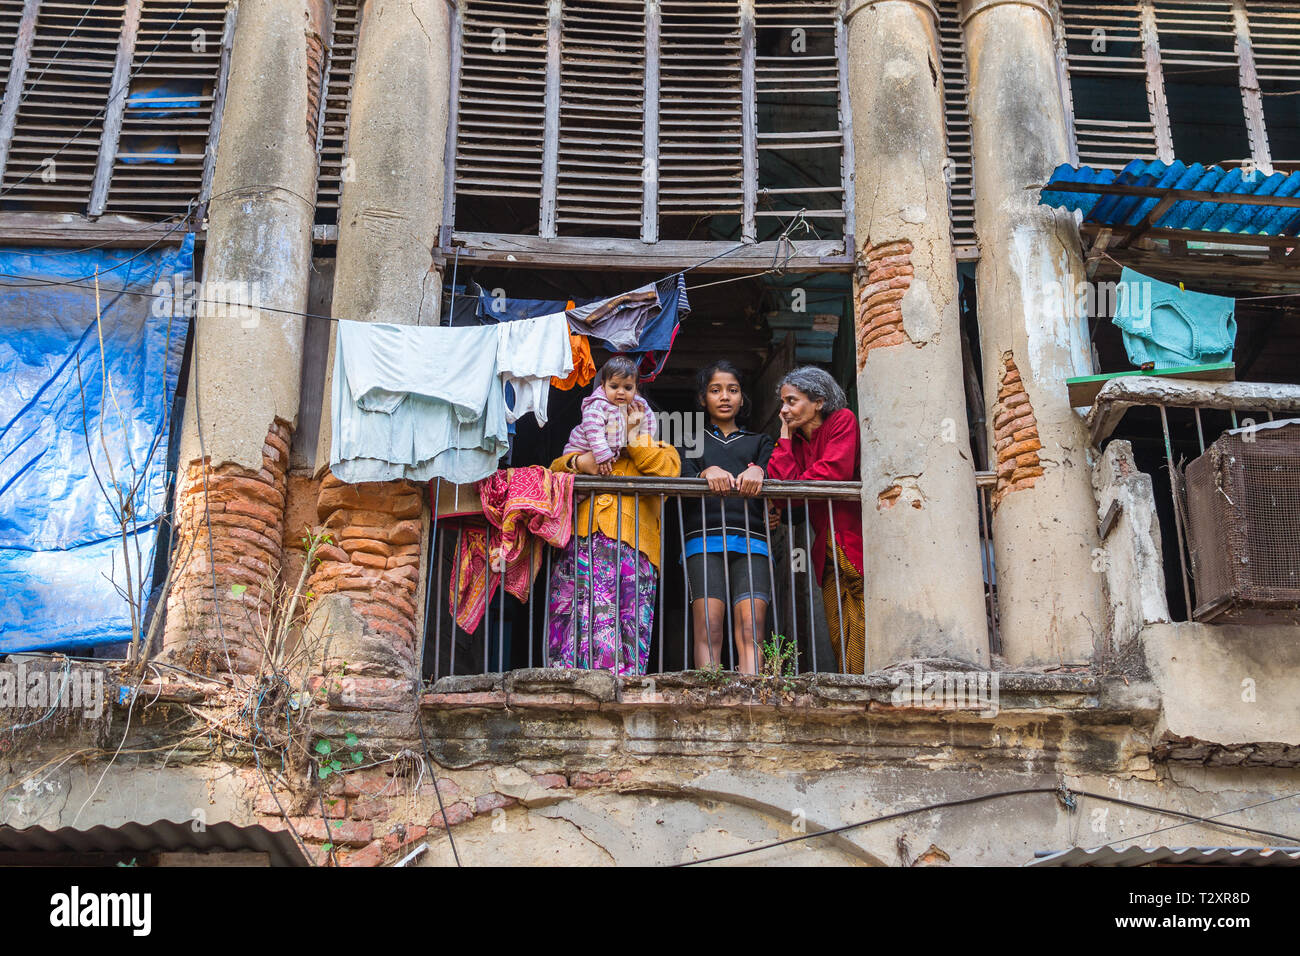 Kolkata, India - January 10, 2015: two women, a girl, and a baby stand on the balcony of an old shabby house with crumbling columns. Stock Photo